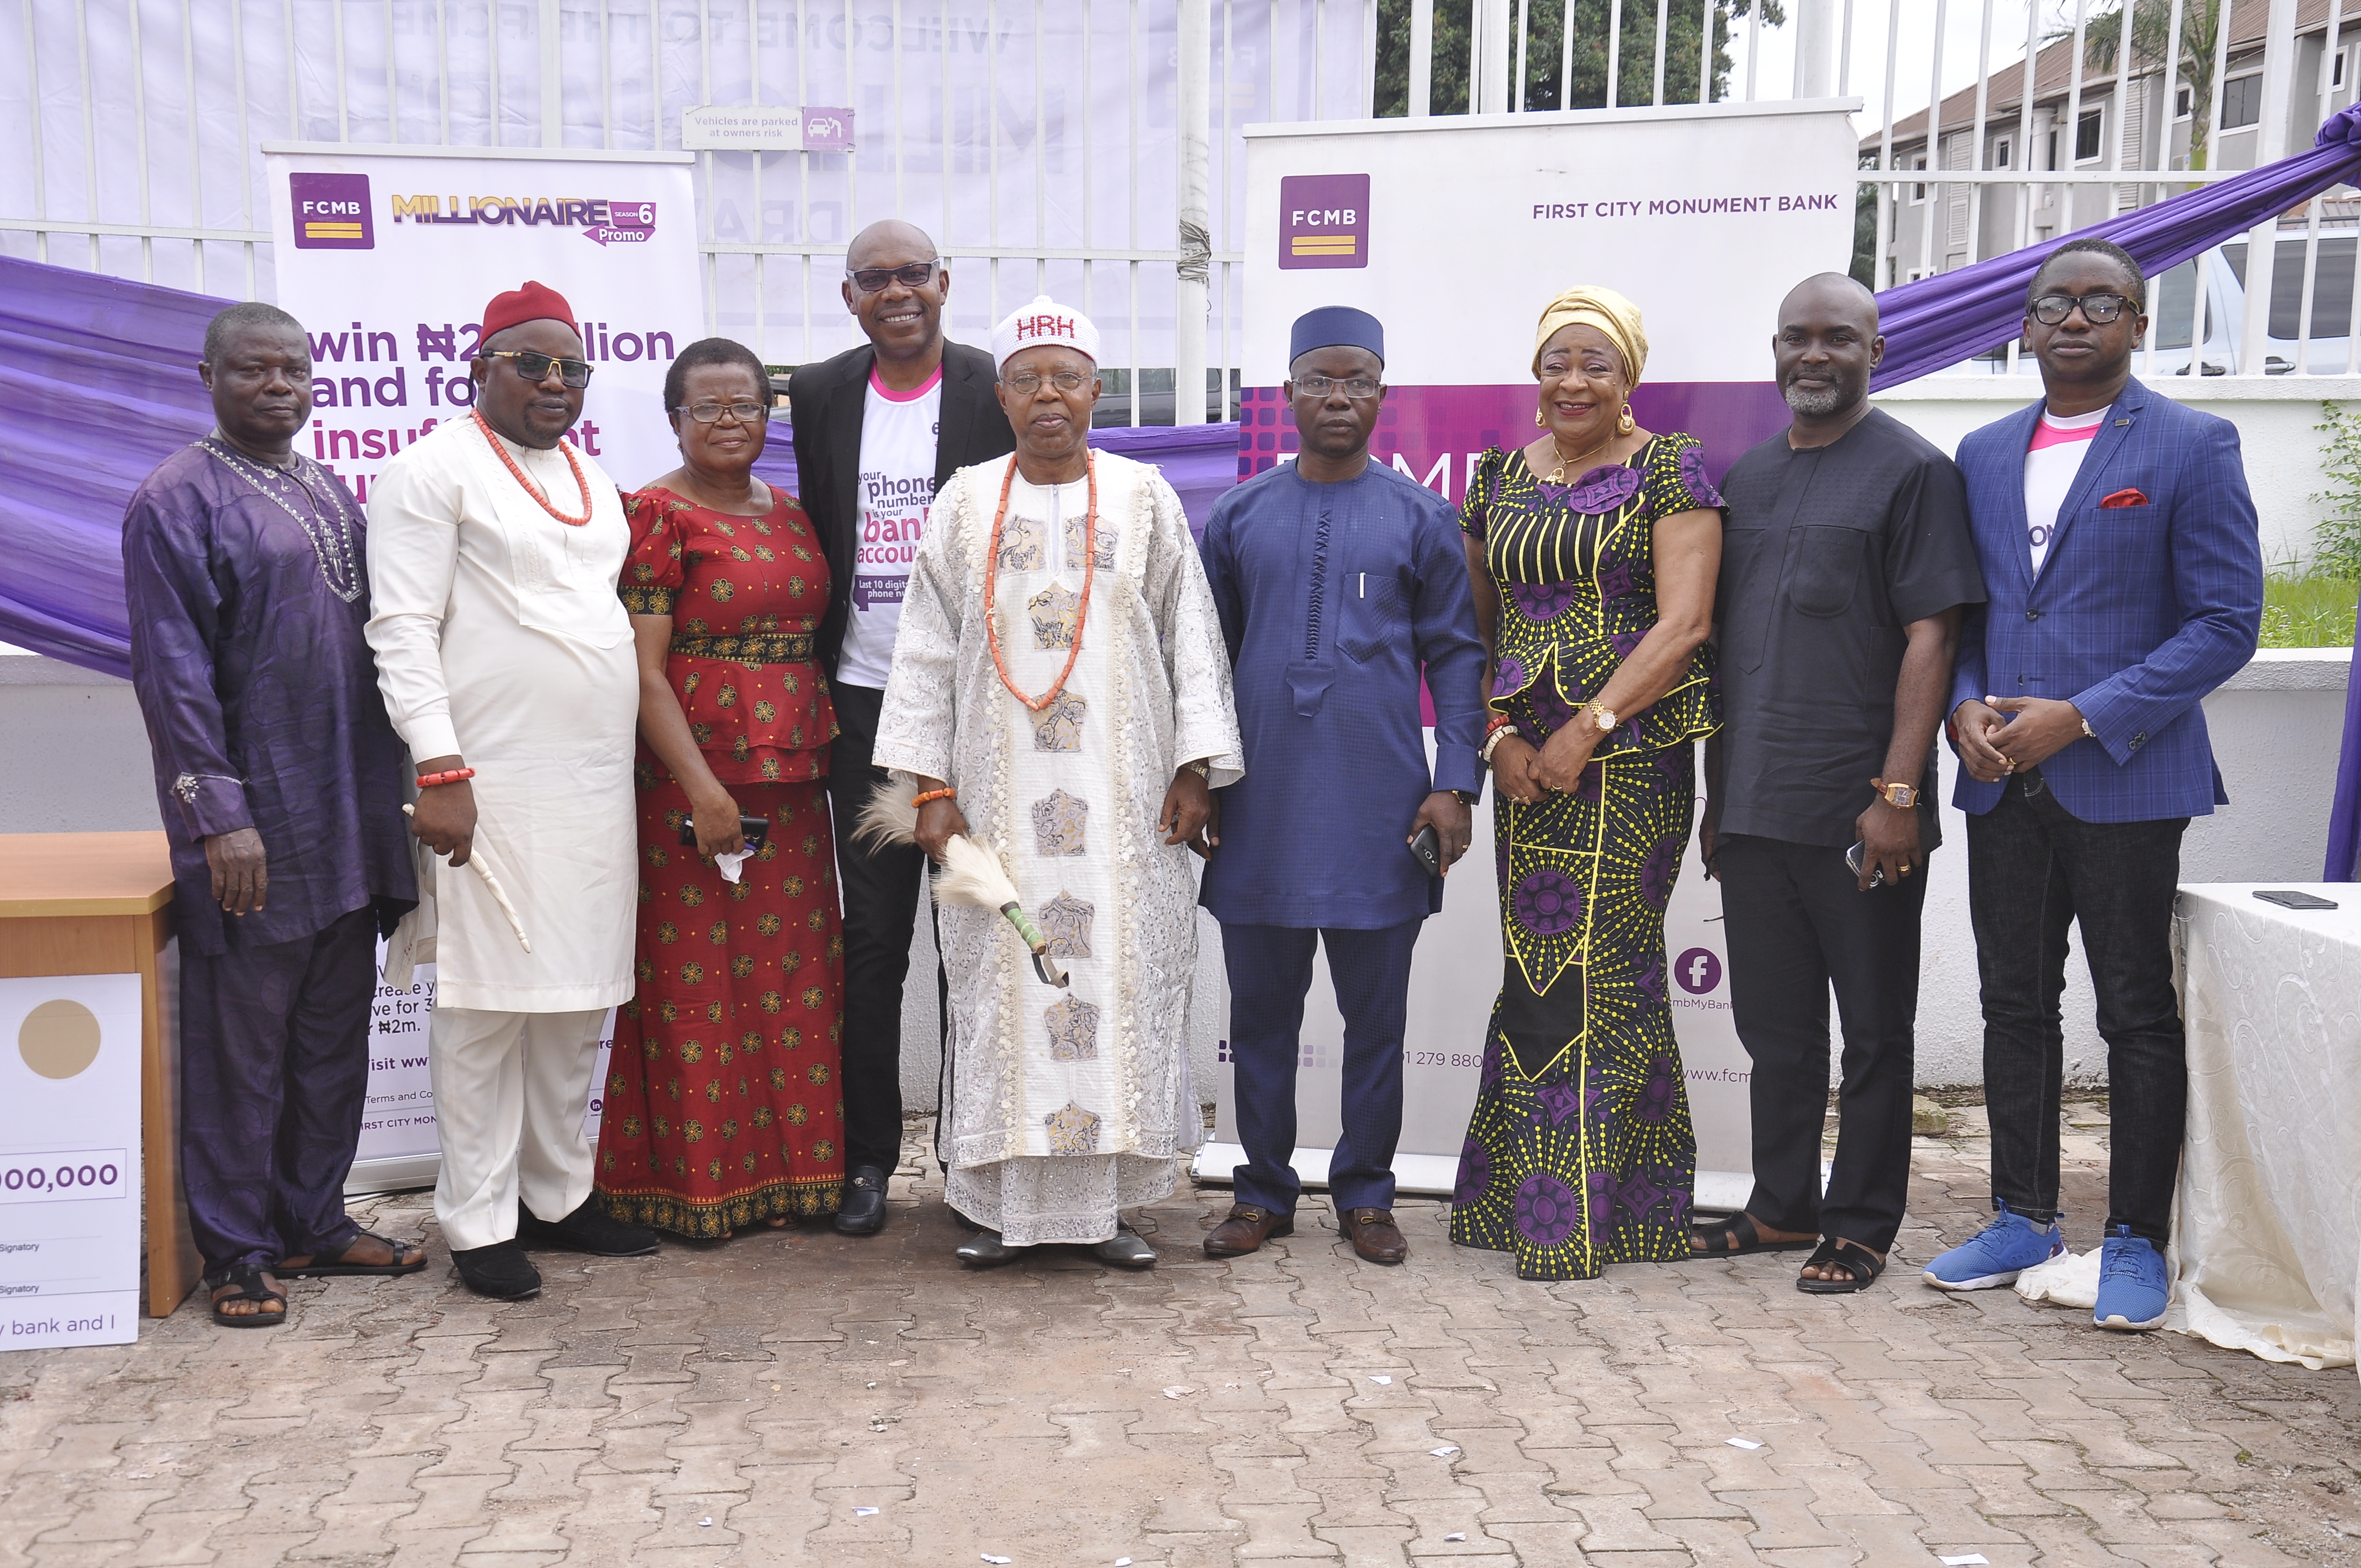 FCMB rewards hundreds of customers in the second draws of “Millionaire Promo Season 6’’